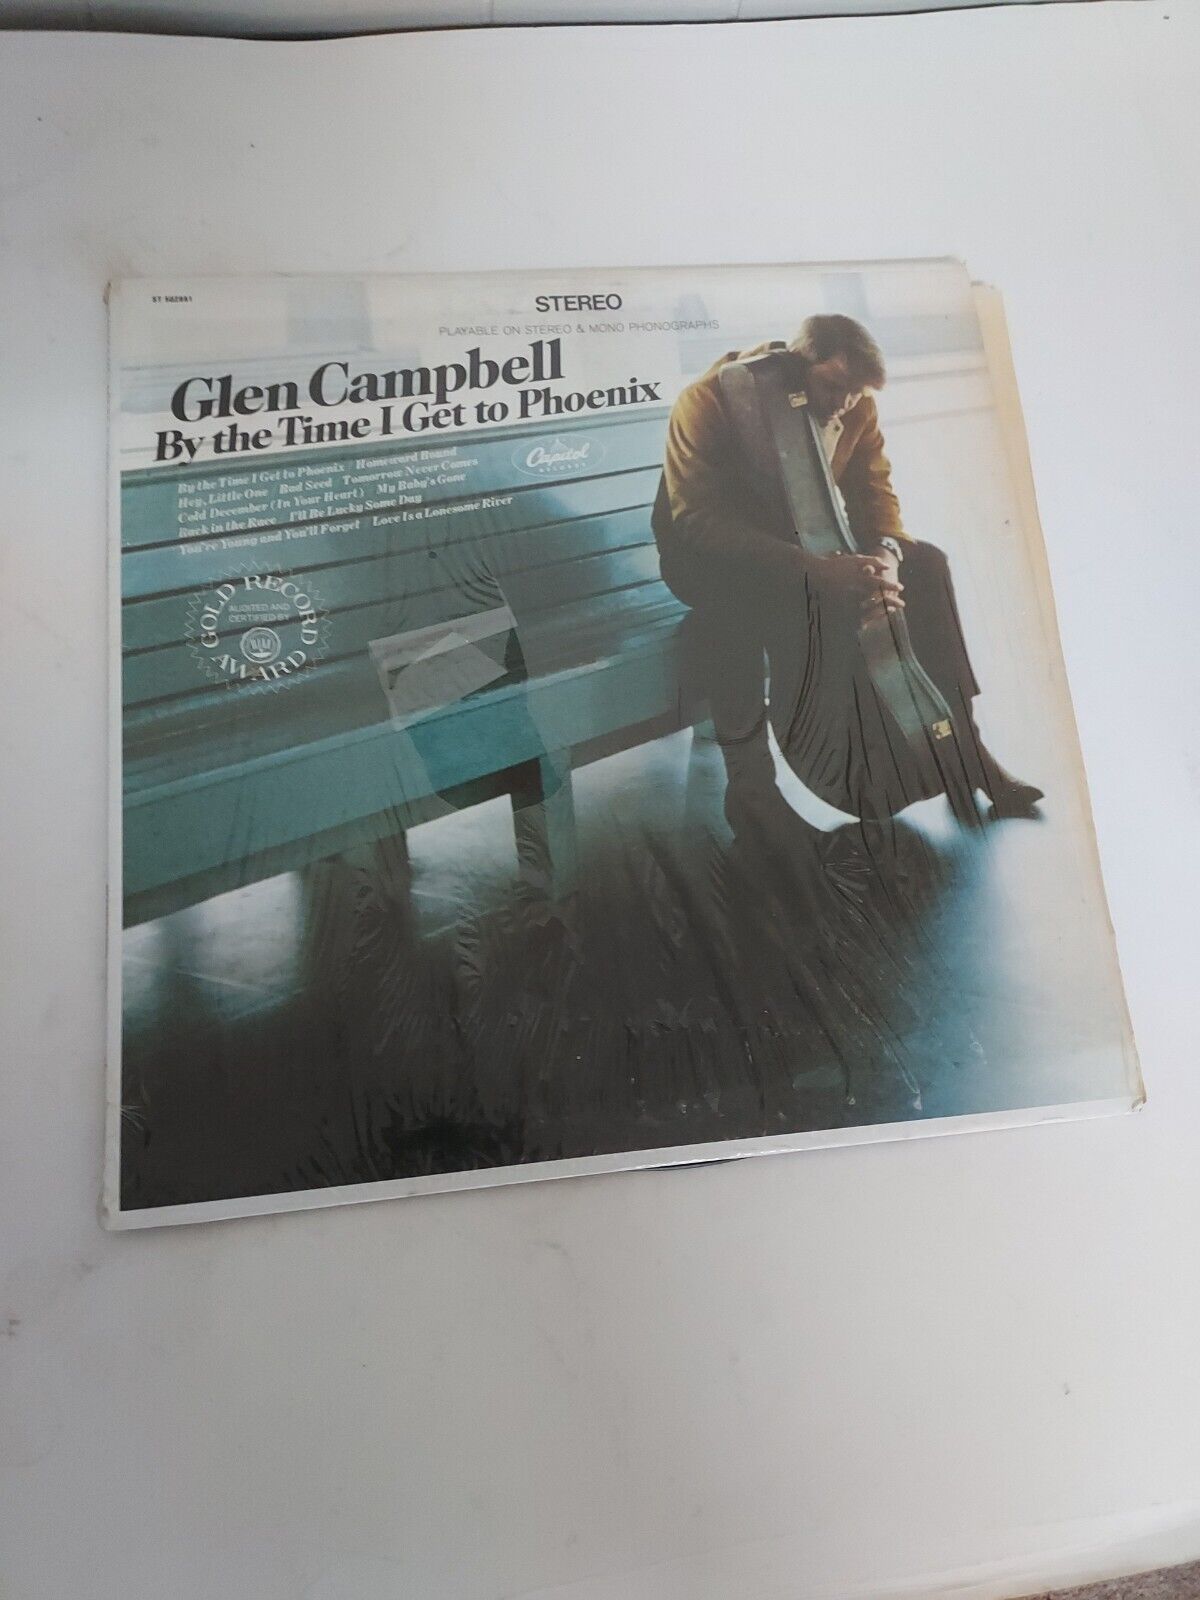 Vinyl Record LP Glen Campbell By the Time I get to Phoenix  VG